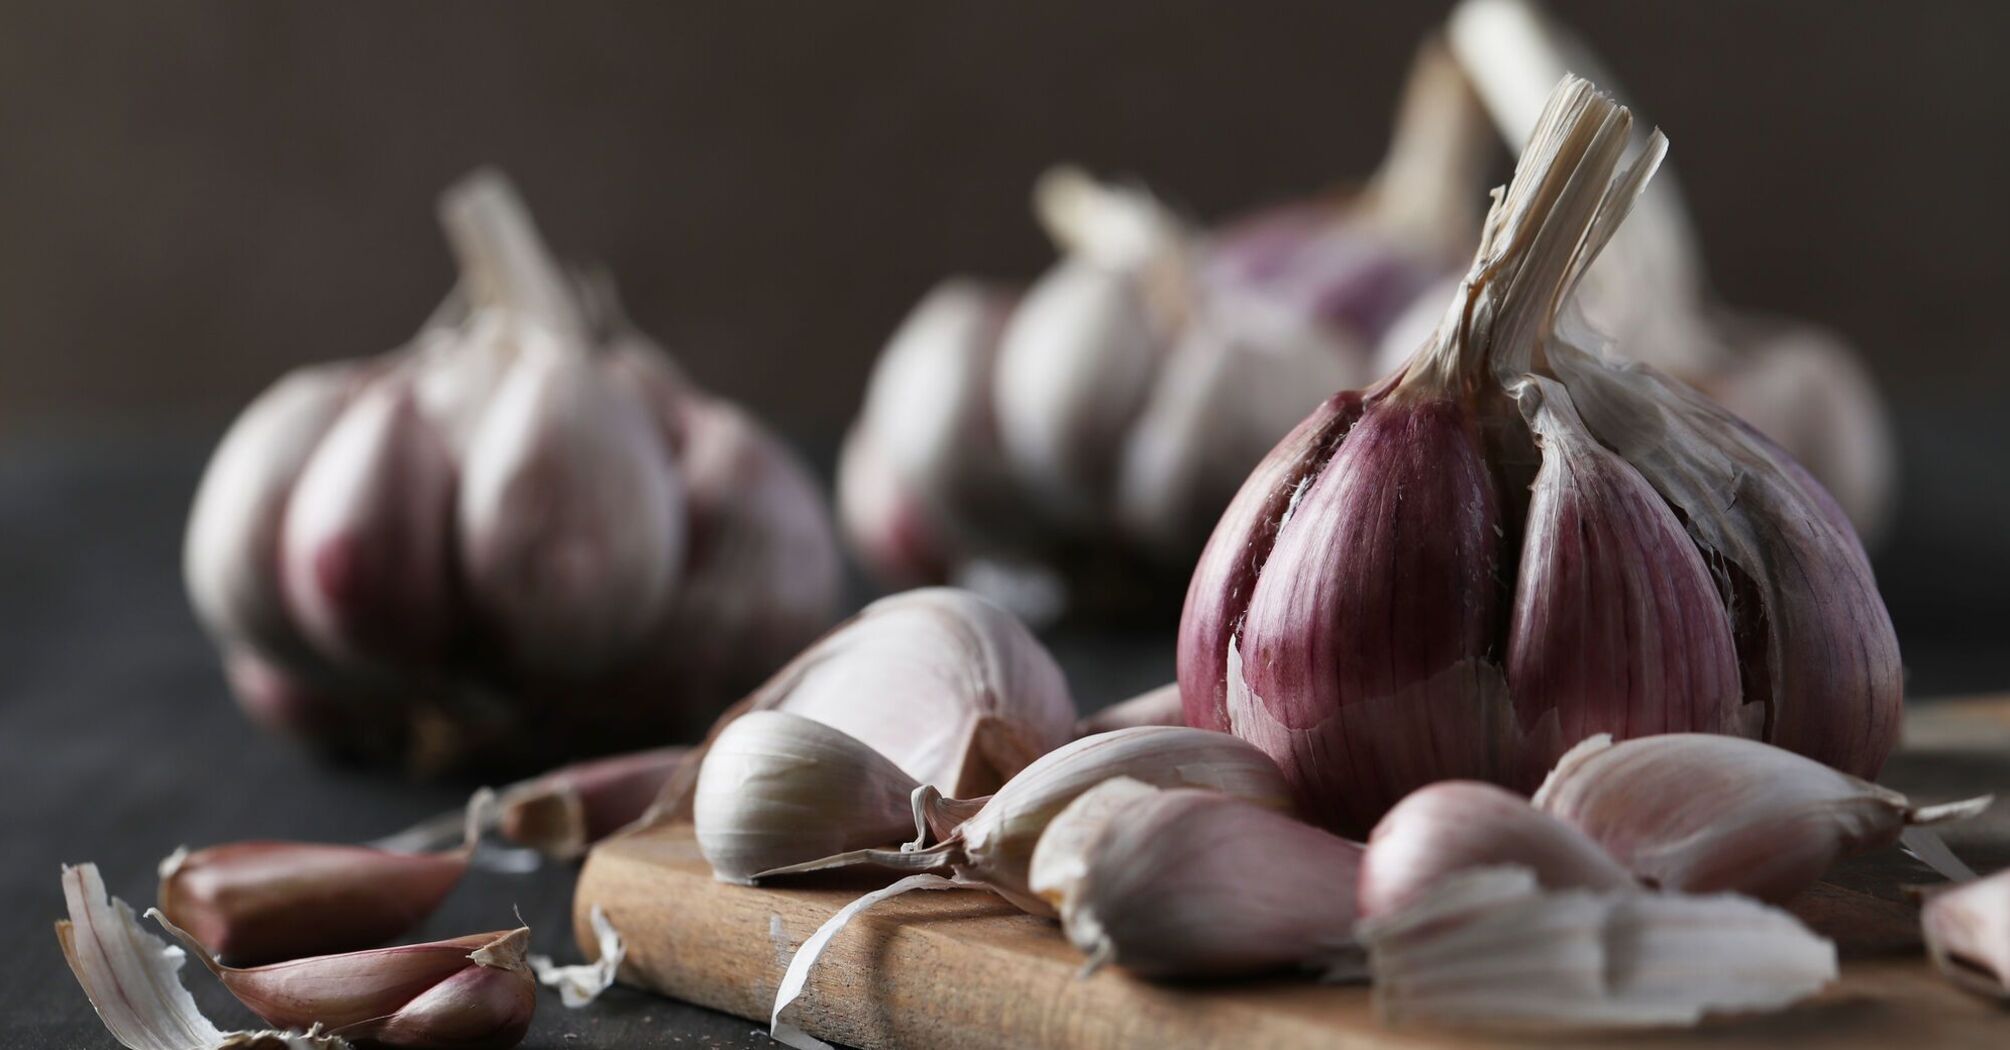 When to harvest garlic: how to tell when it's time